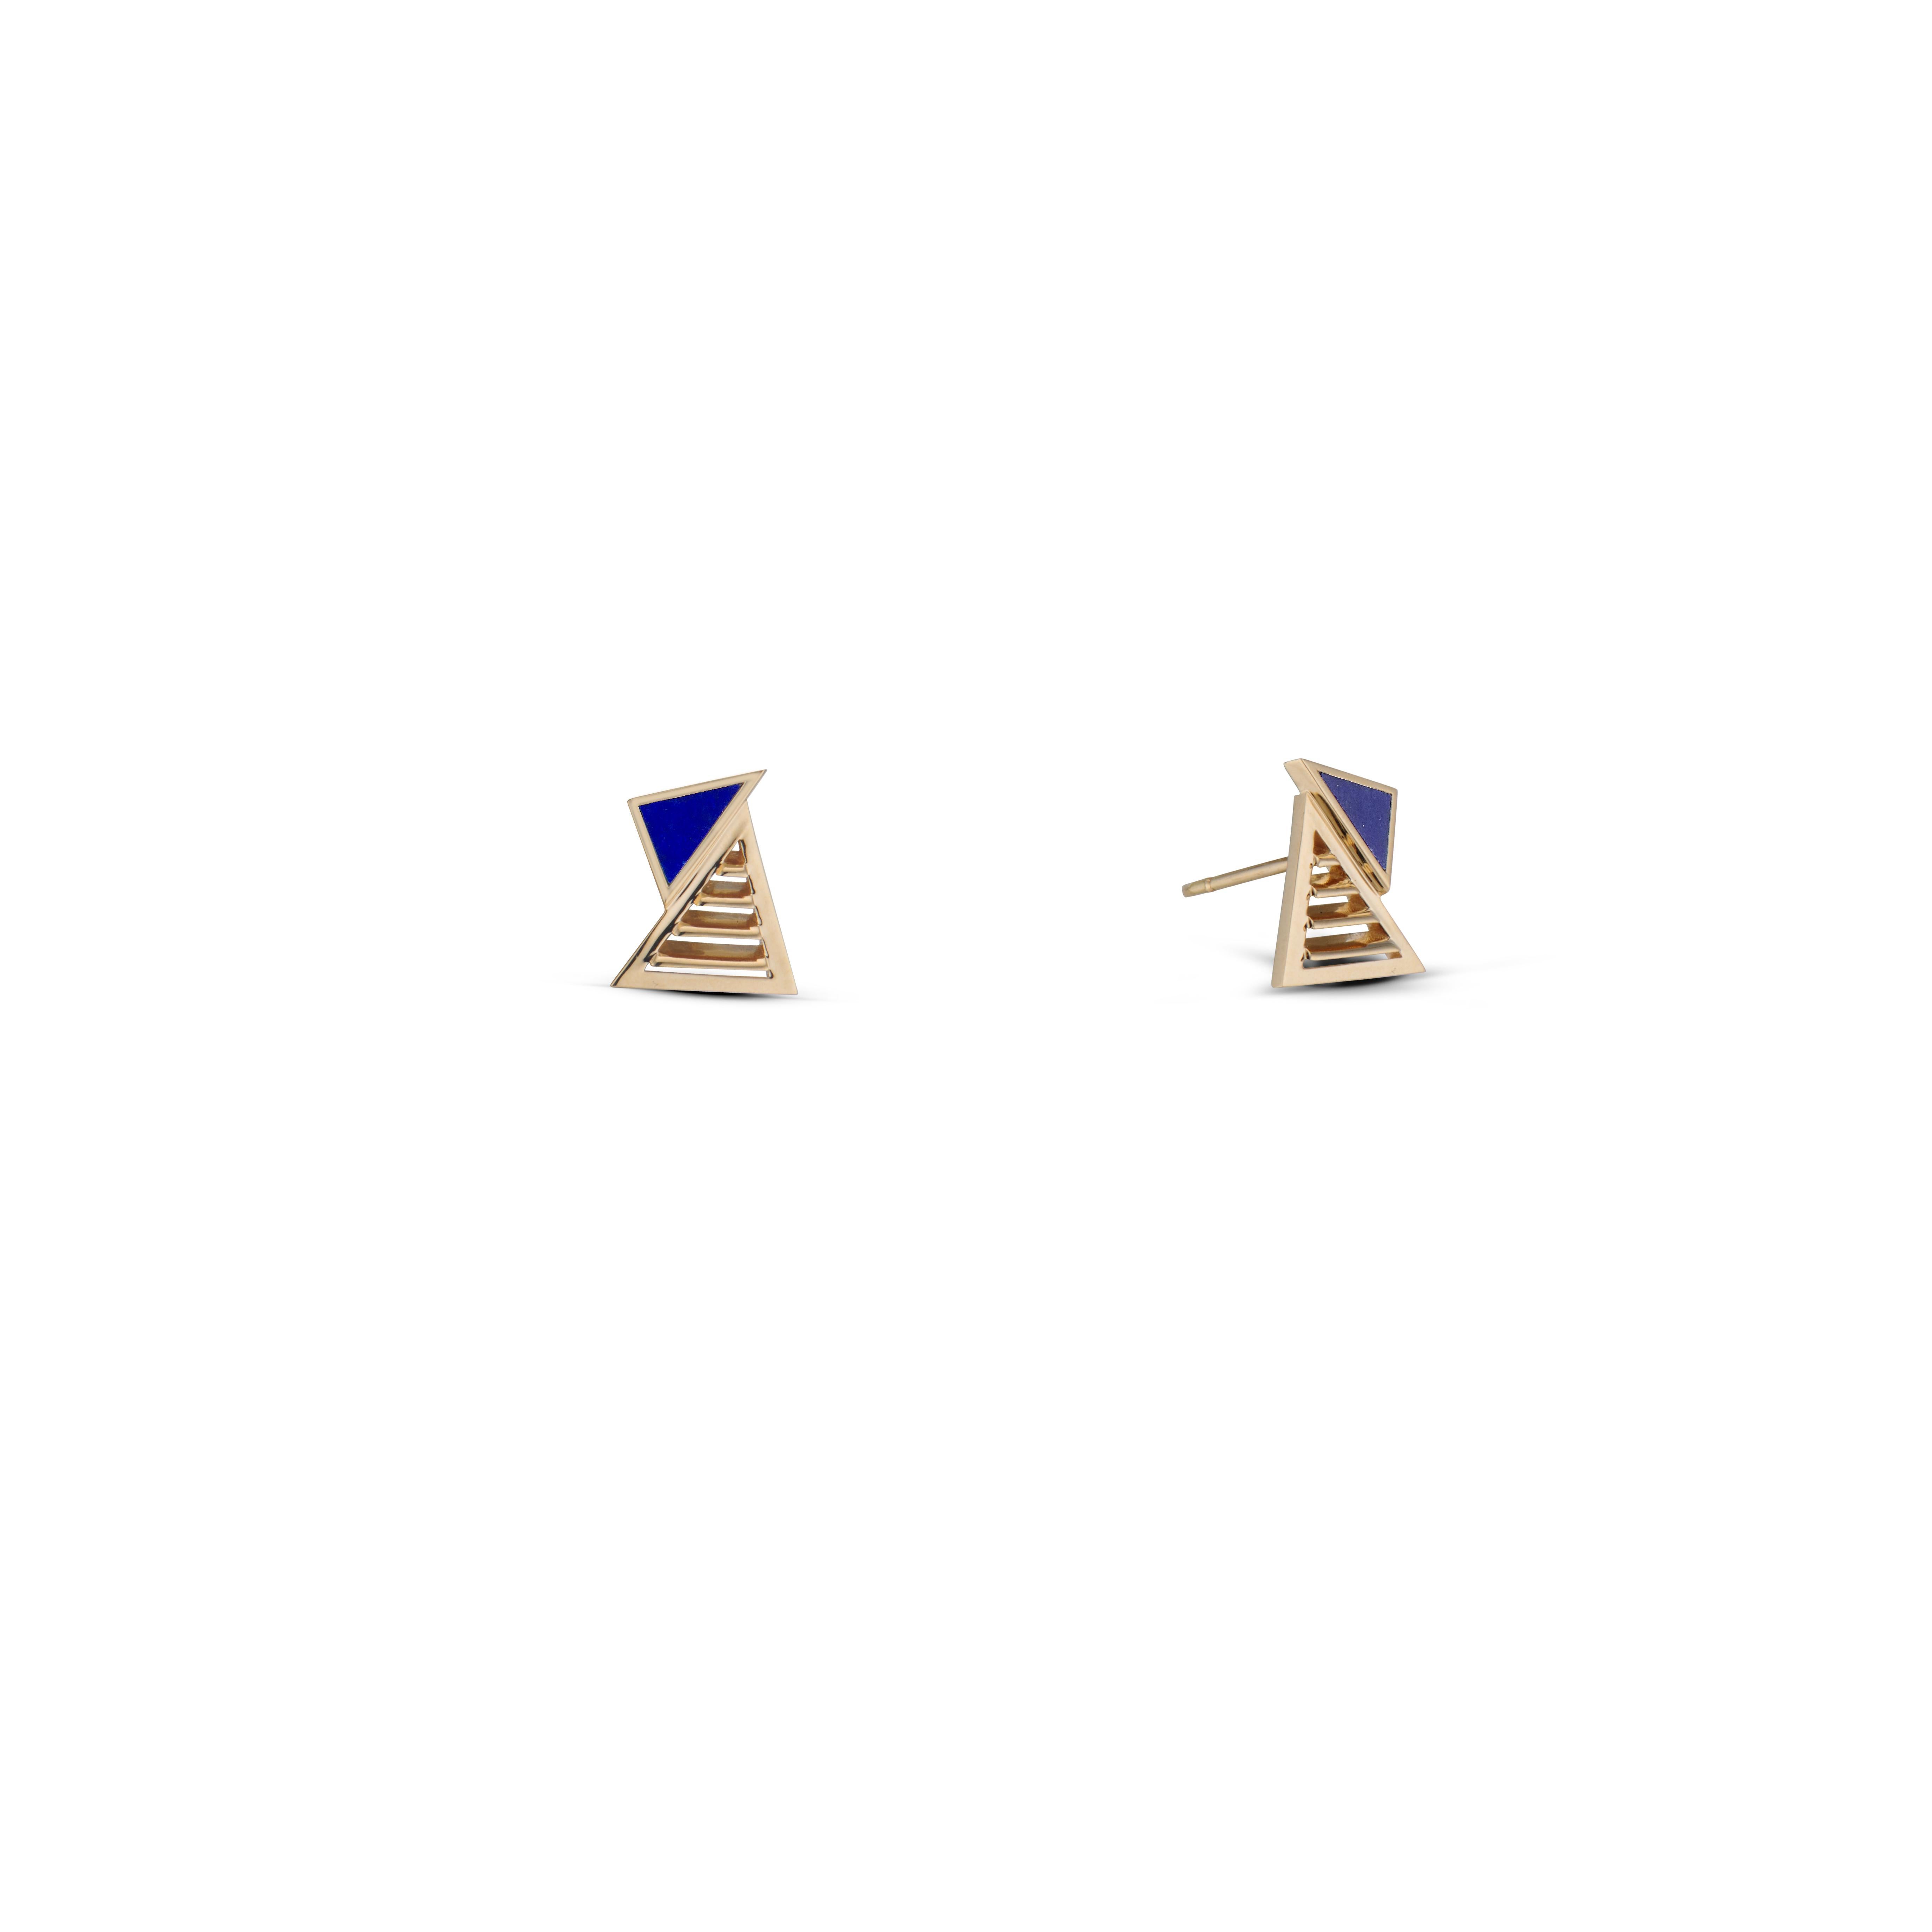 The Petite FENESTRA ARC EDGE earring celebrates the inherent fierceness that resides within every one of us. Each architectural cut-out in these earrings exudes confidence and strength, empowering us as we embark on a new day. This daintier